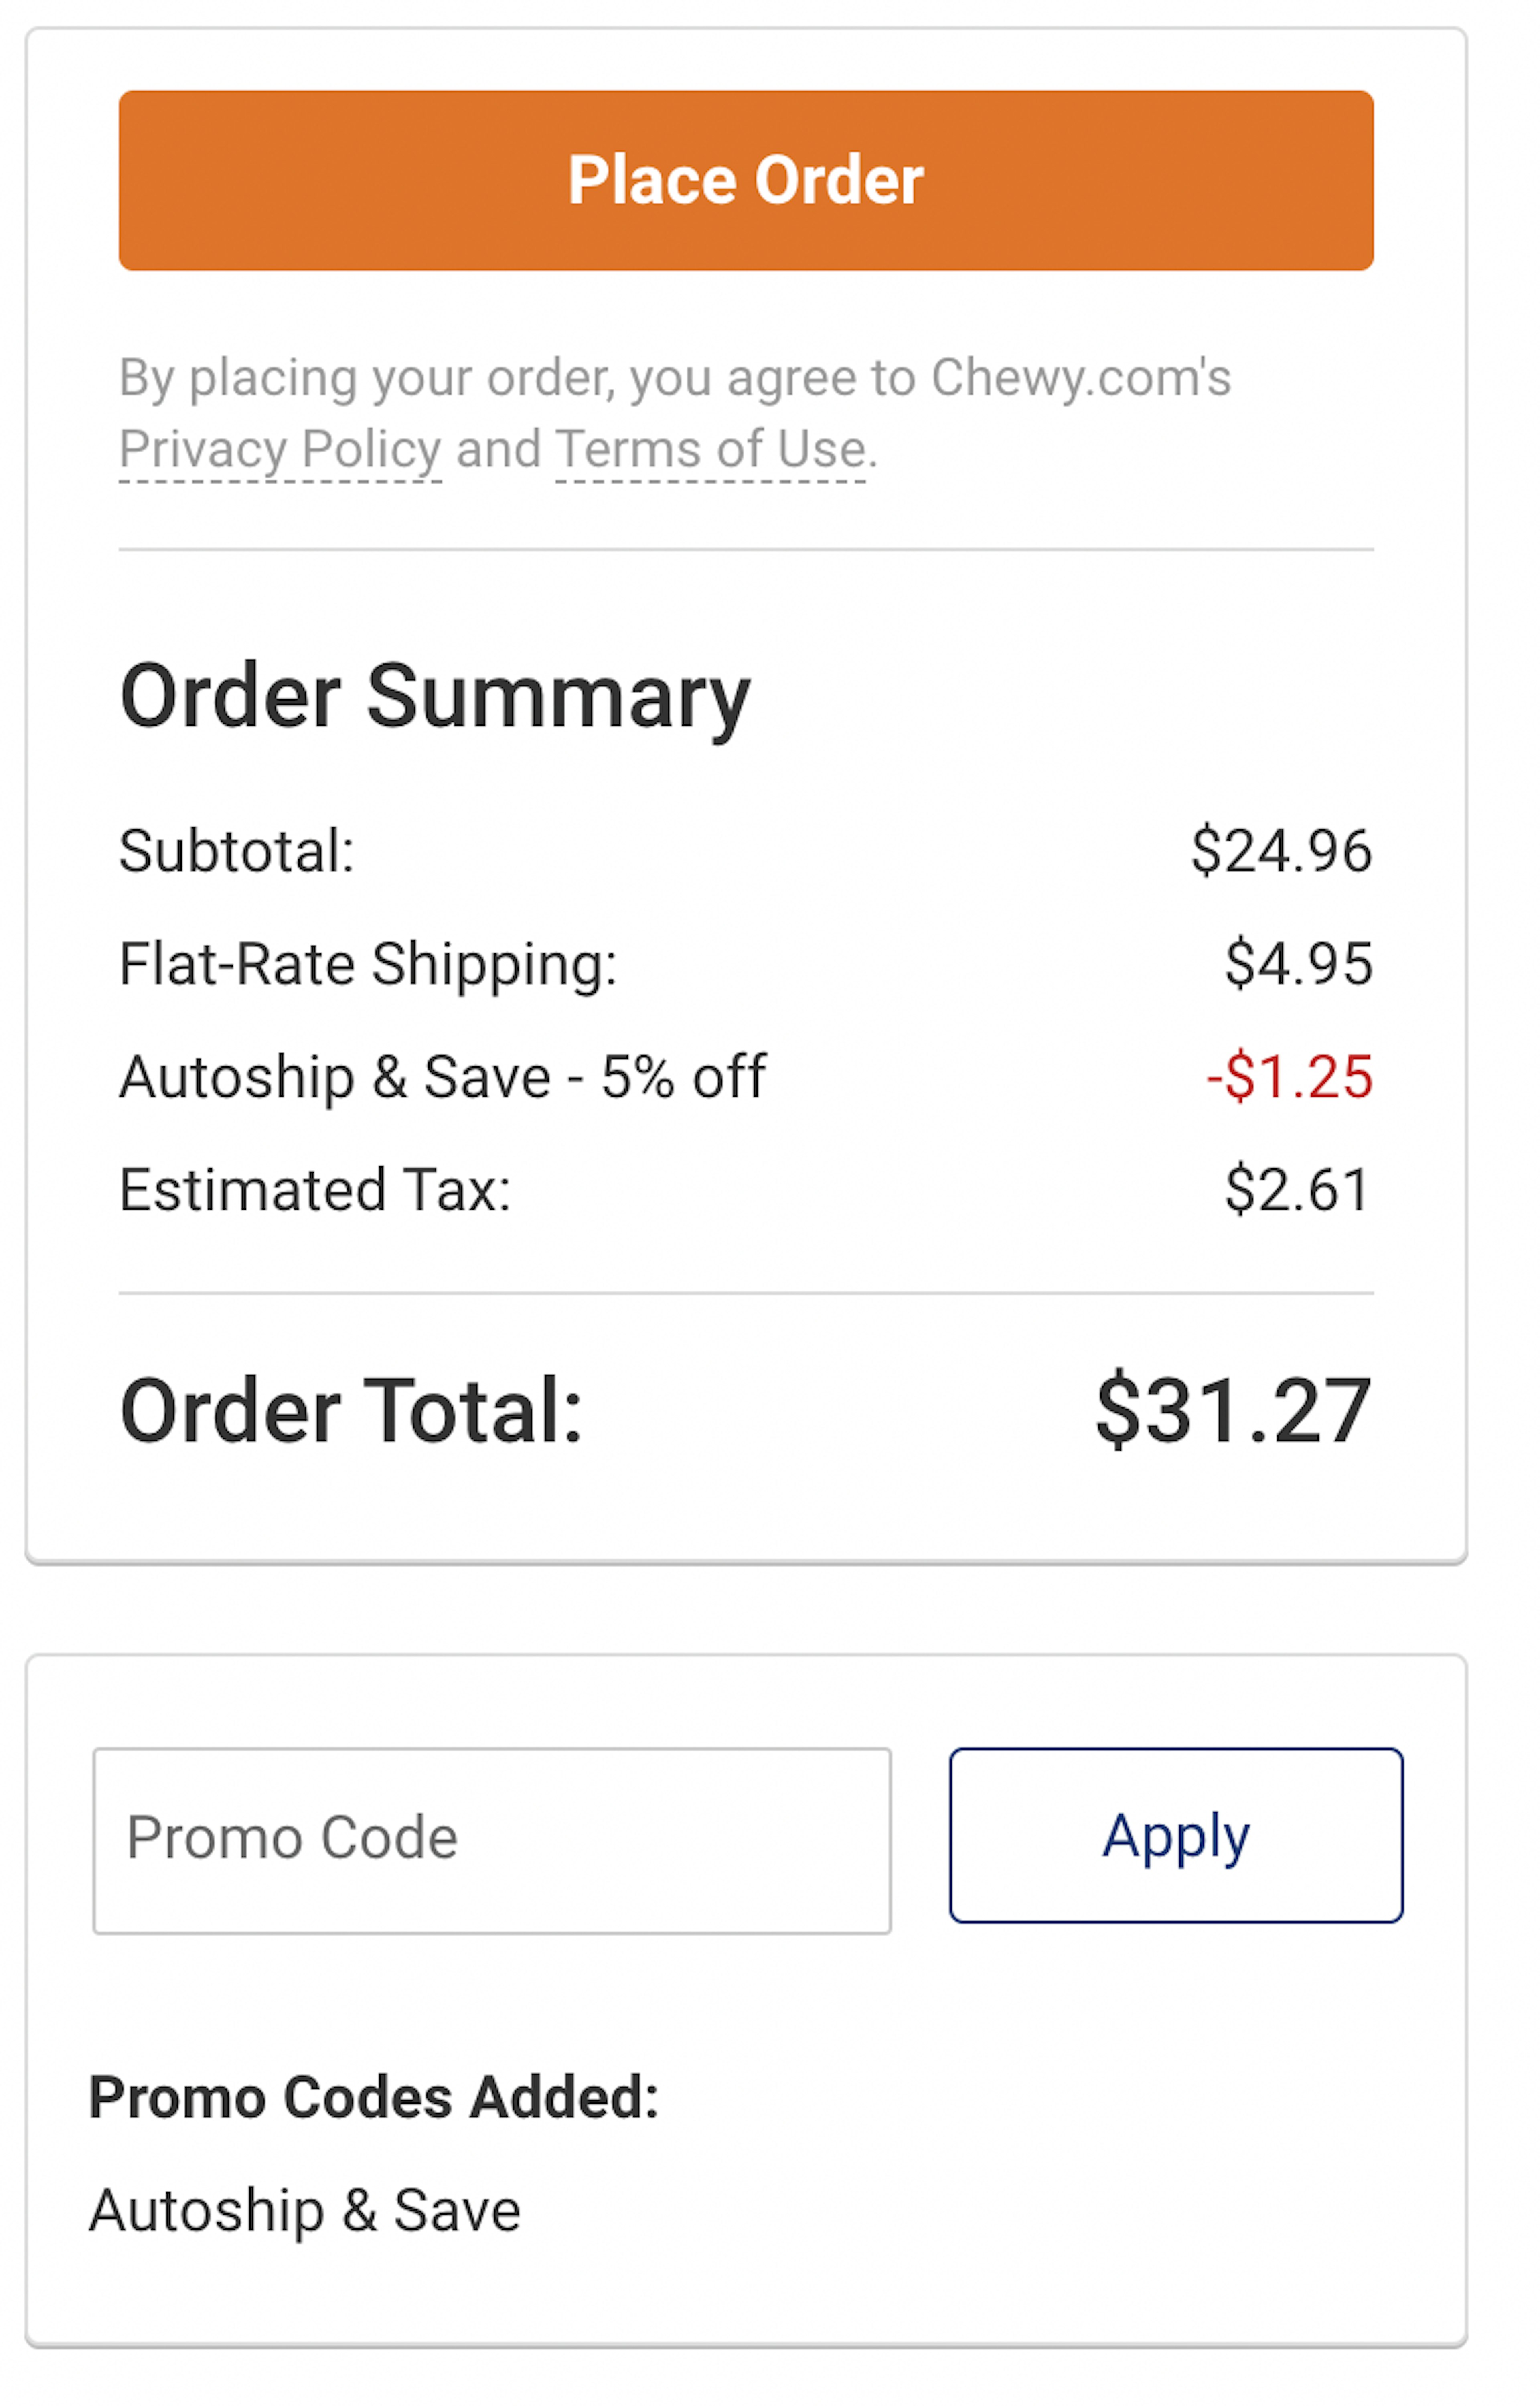 11 Most Common Coupon Codes You Should Always Try